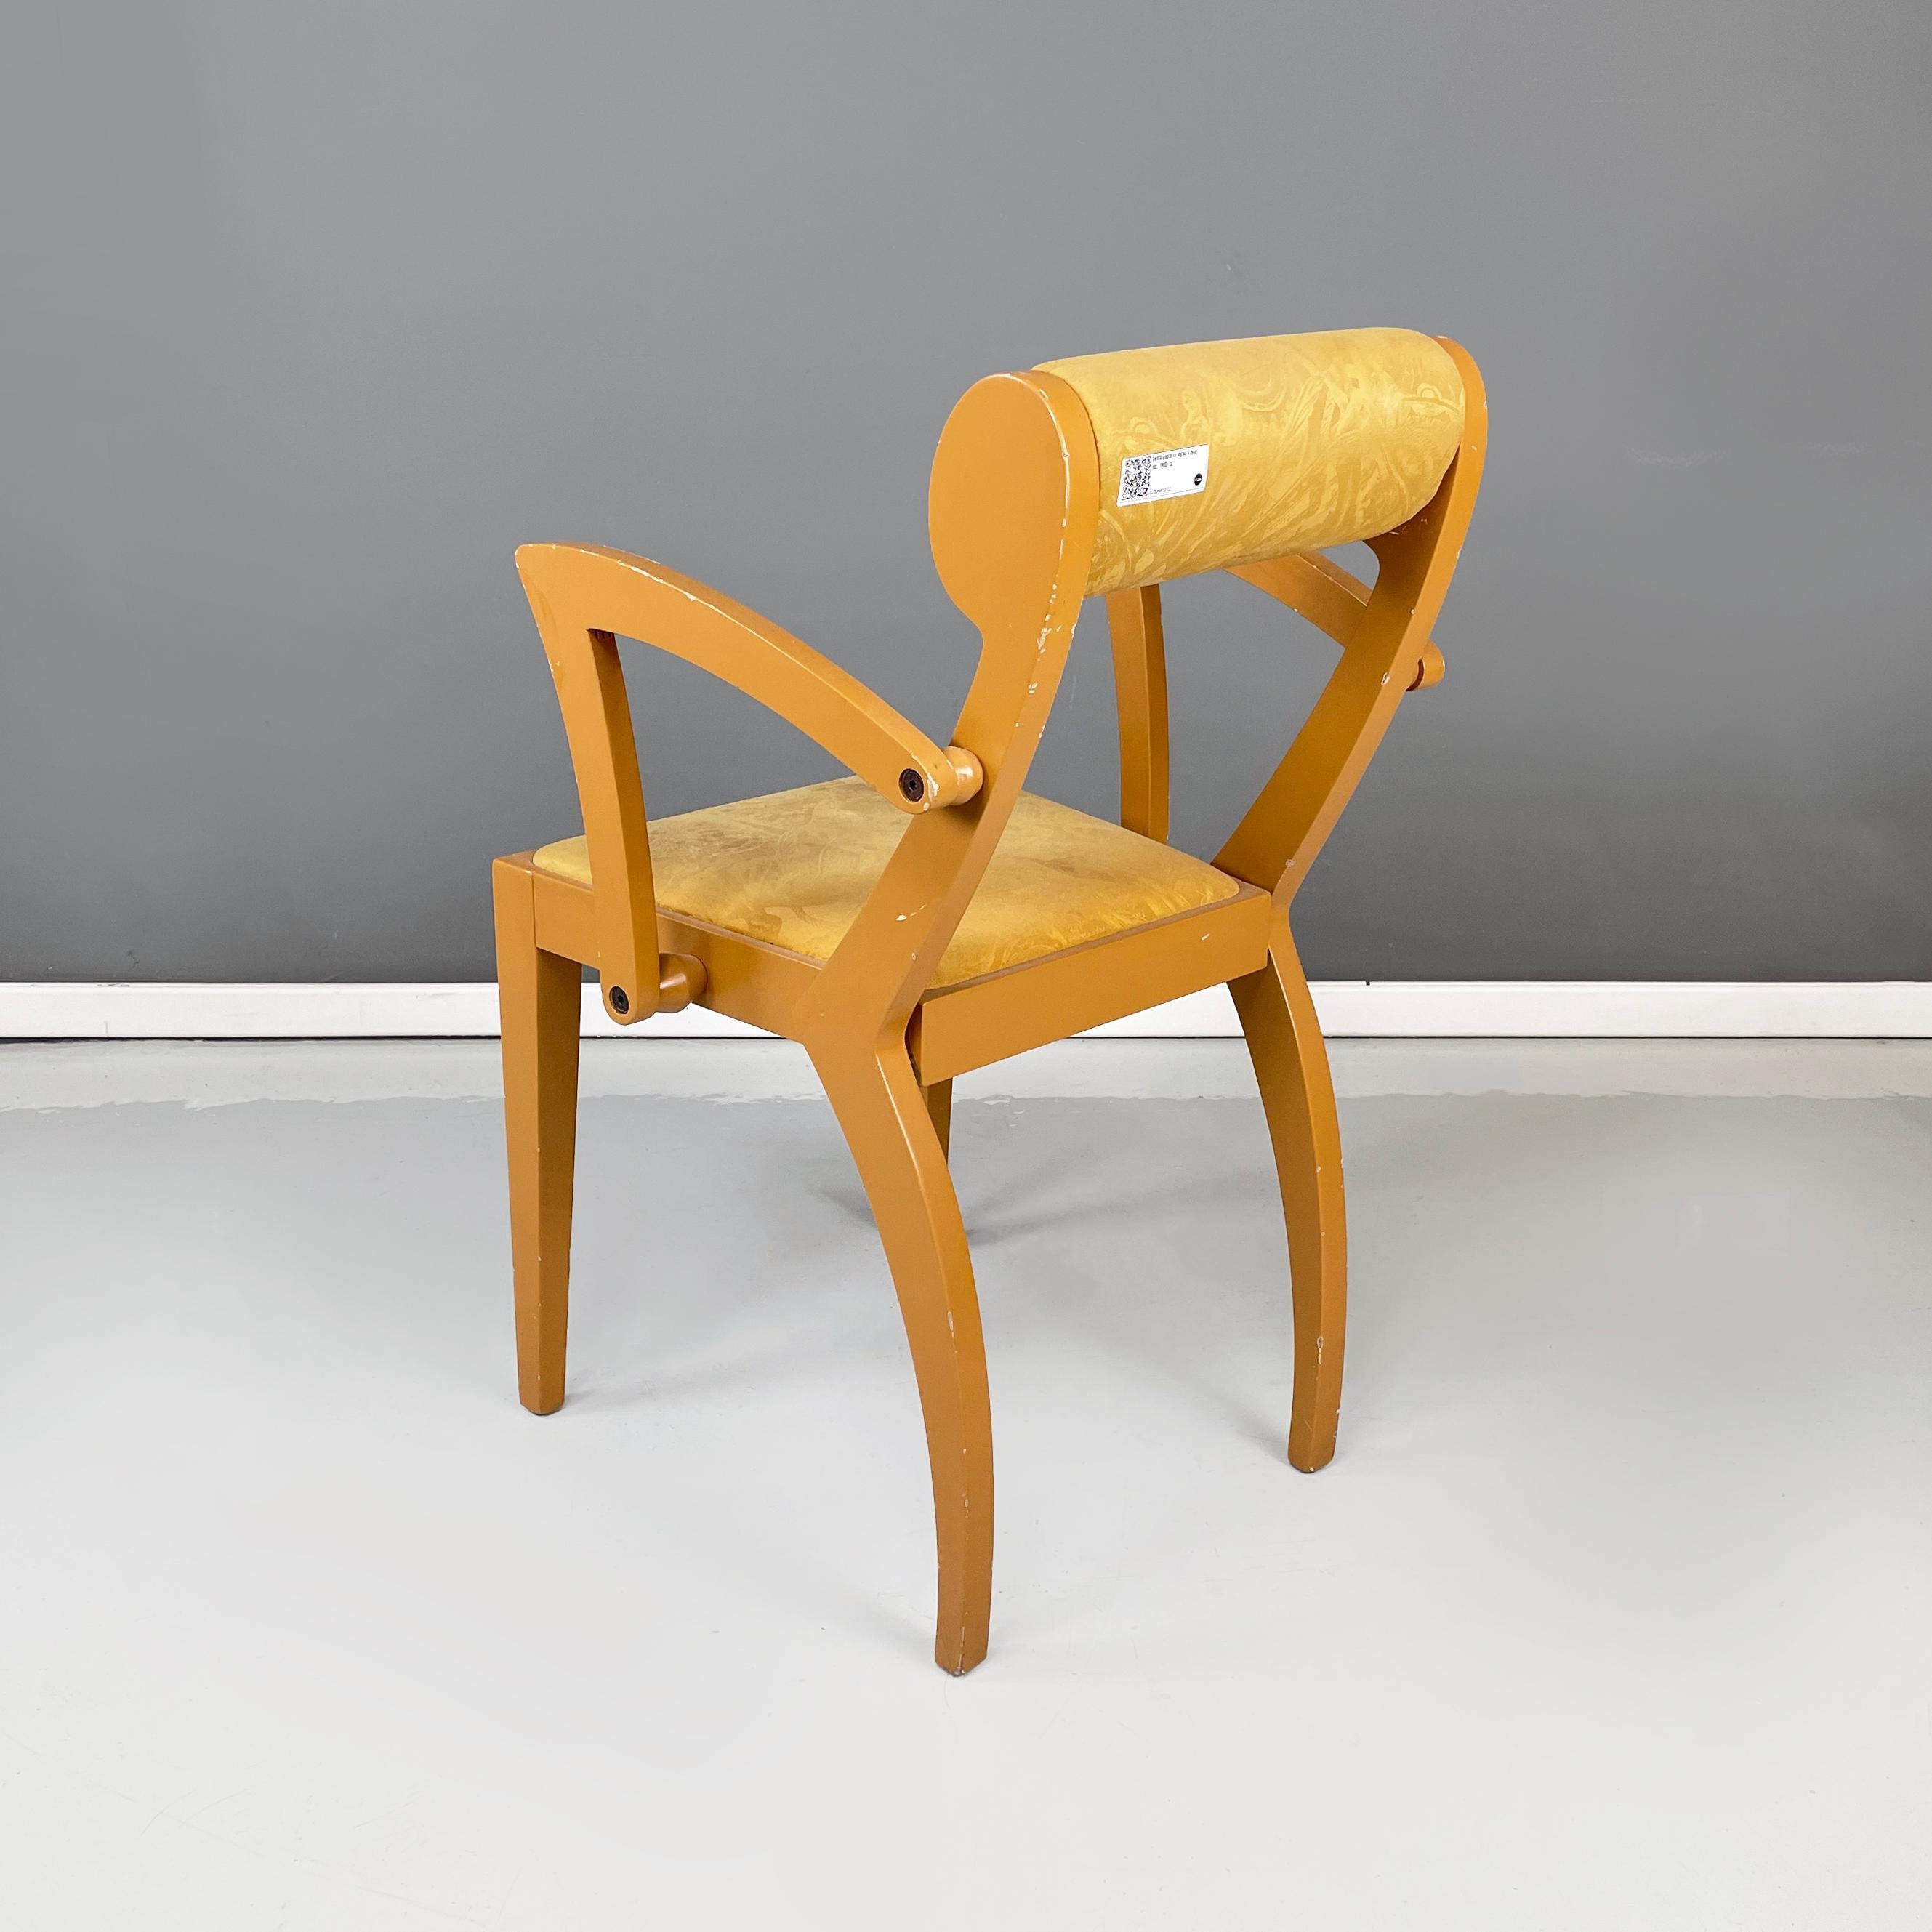 Modern Italian modern yellow fabric and wooden chair by Bros/s, 1980s For Sale